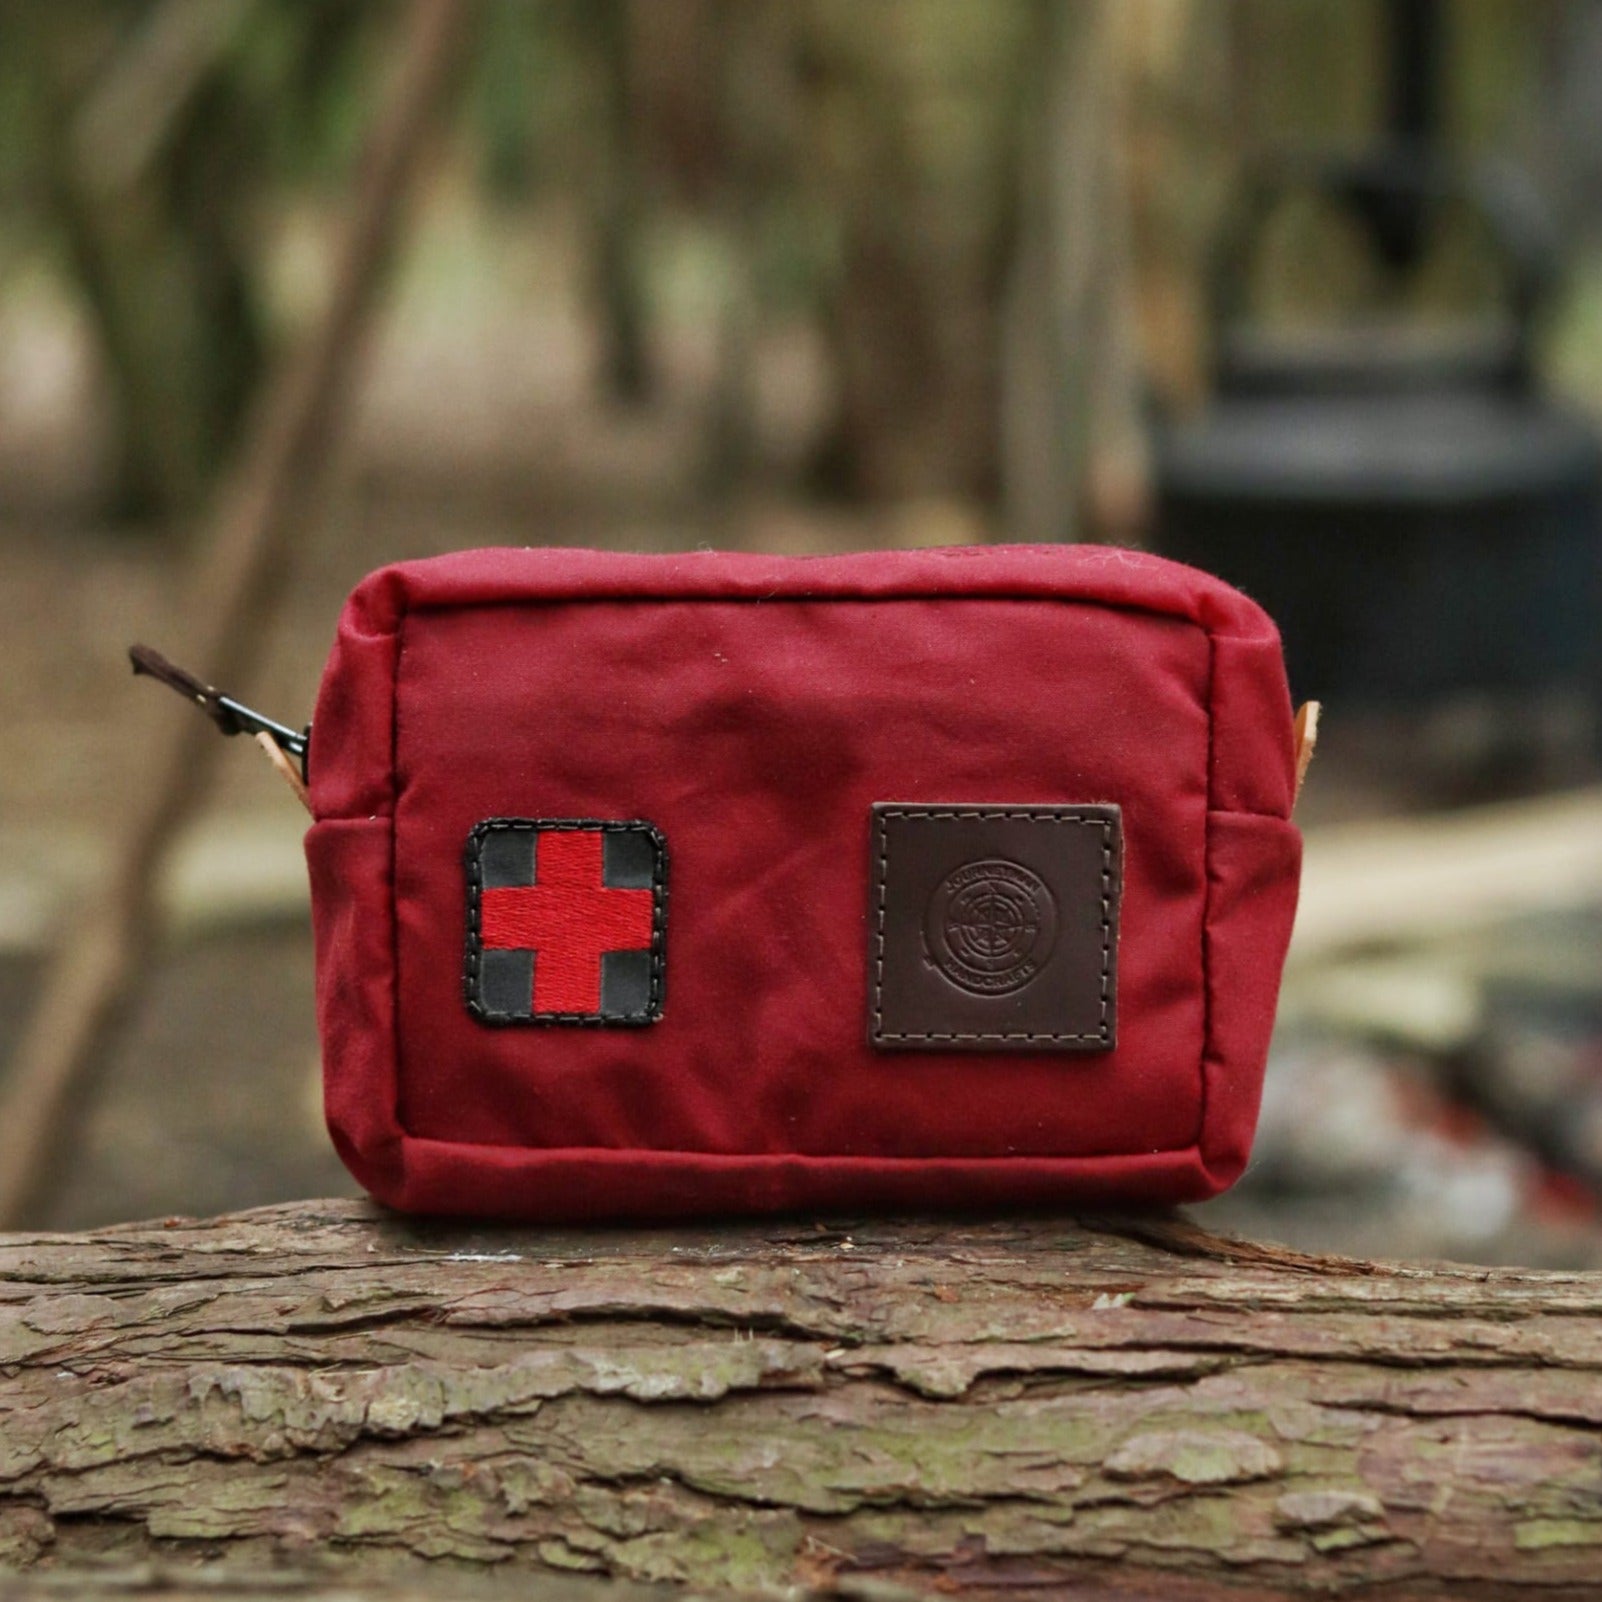  A red traditional wax canvas first aid kit belt pouch with a red cross and leather patch